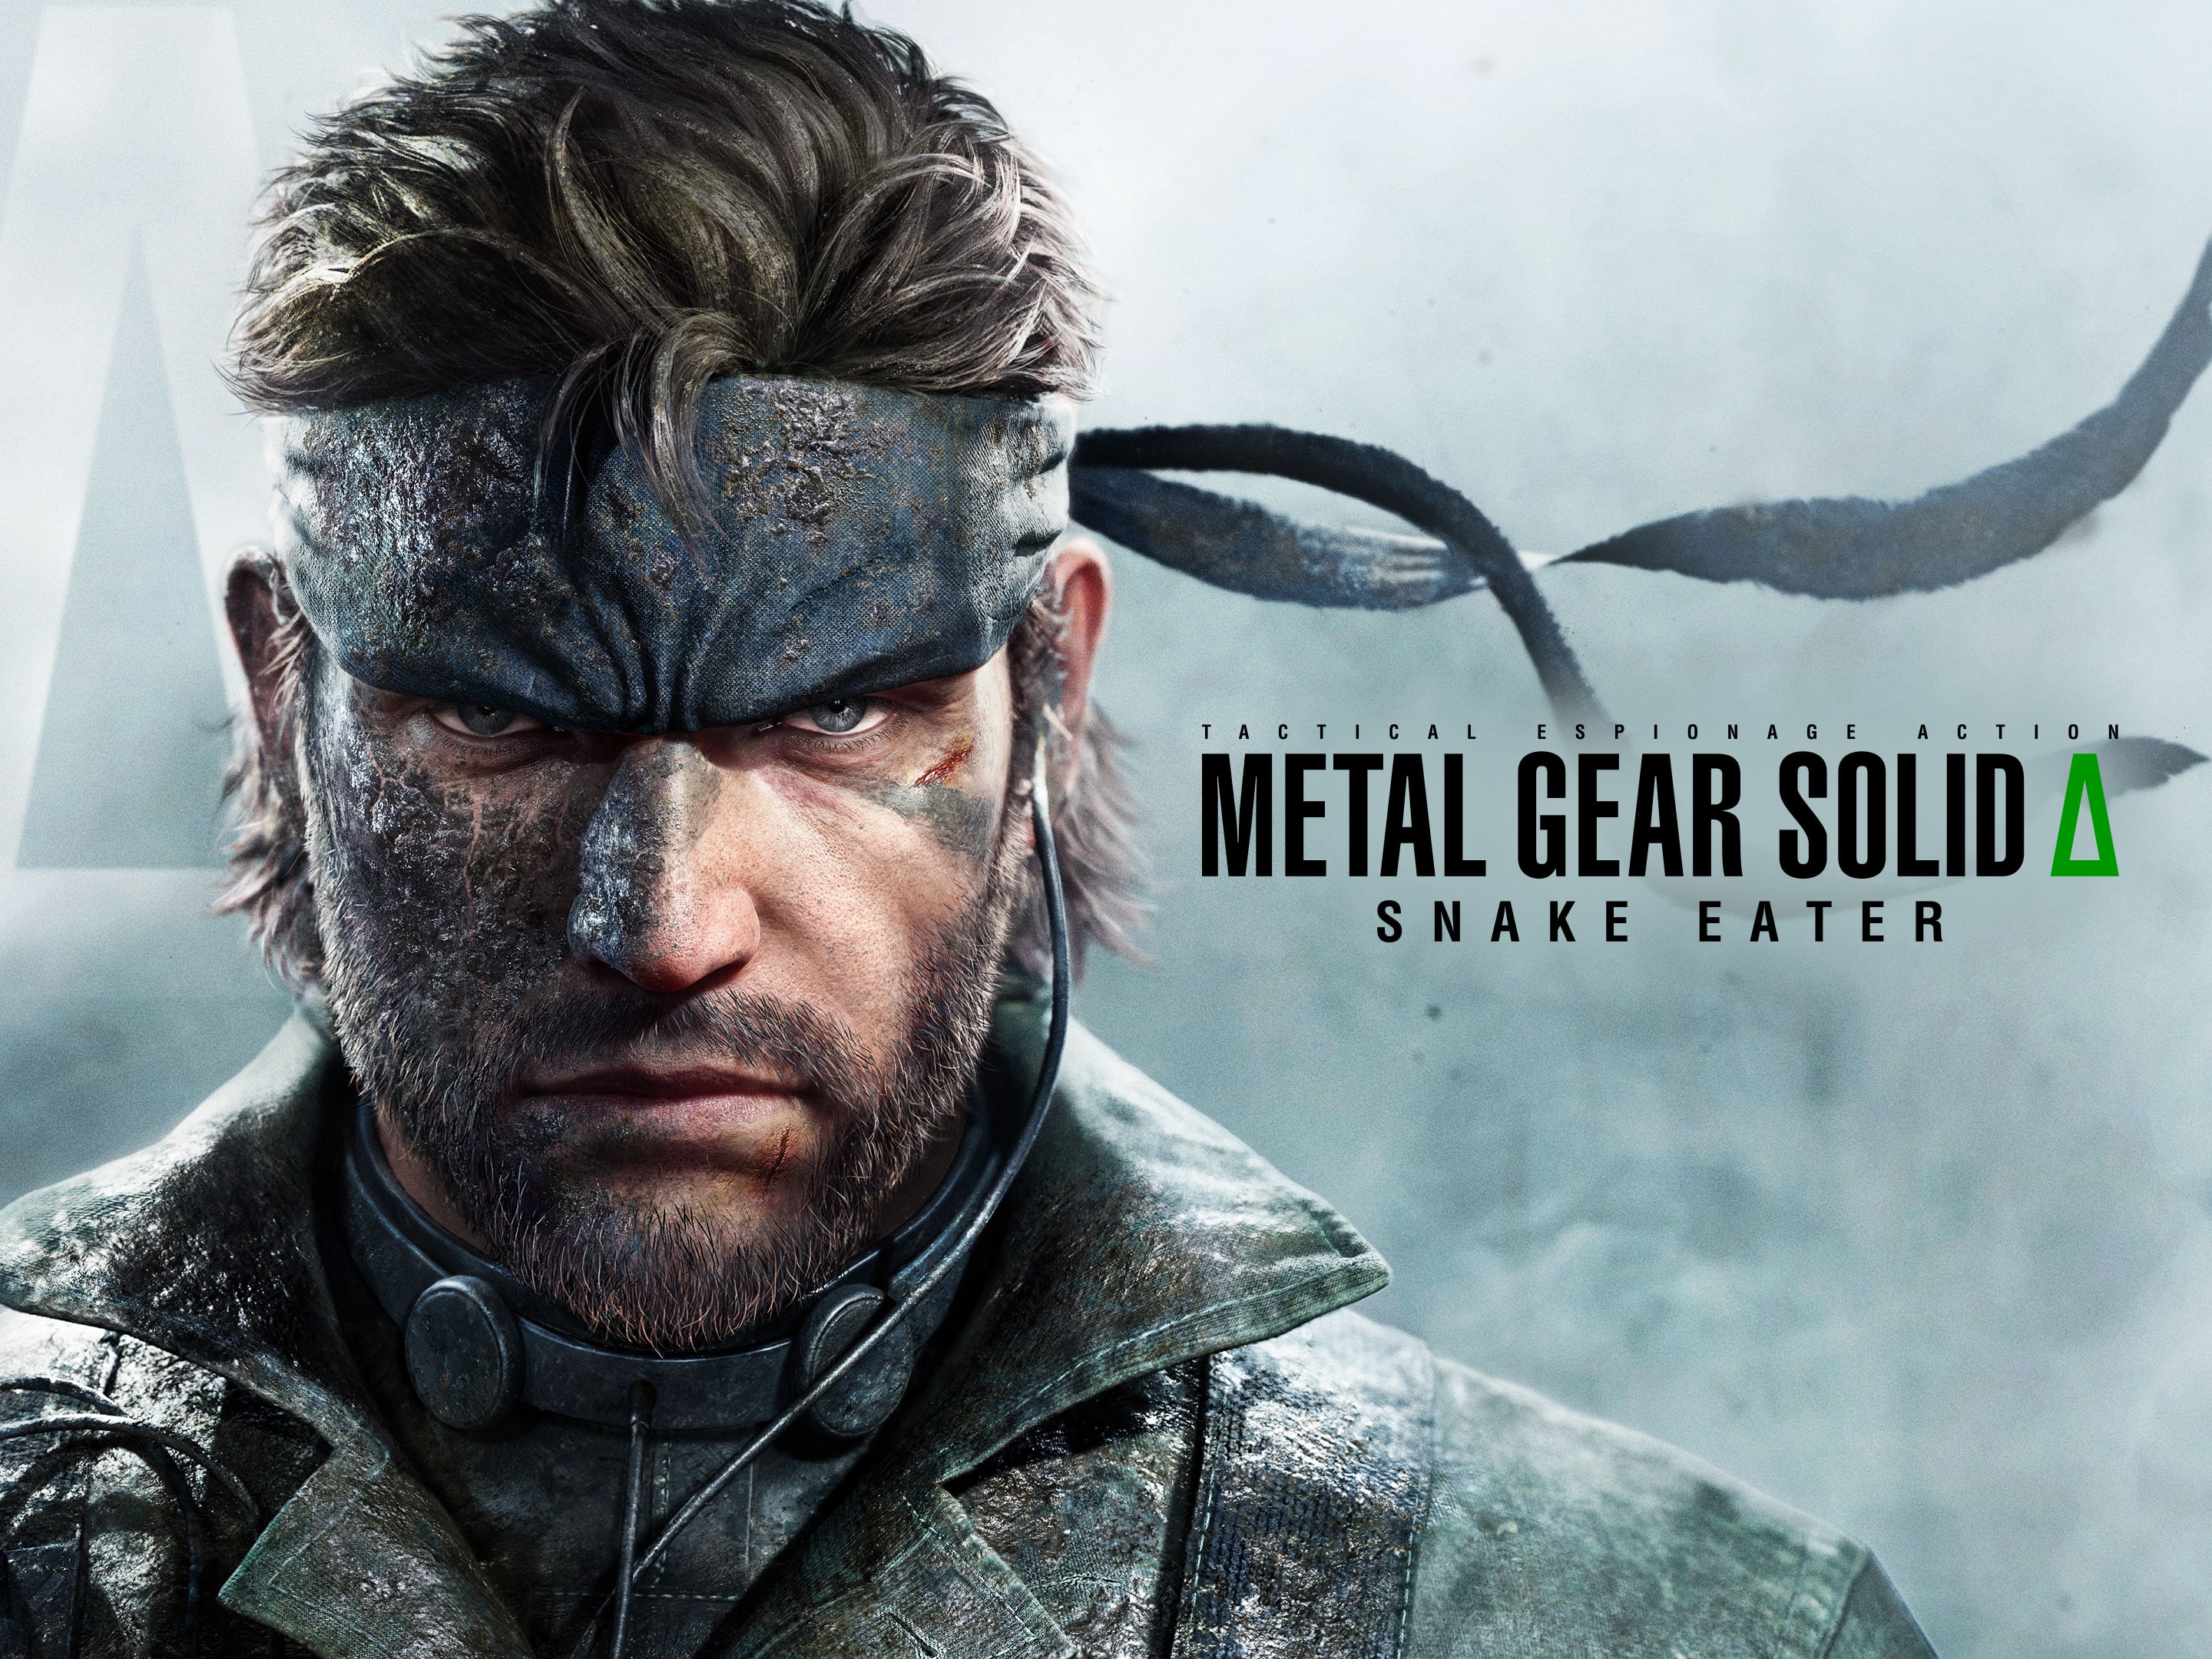 Metal Gear Solid Delta: Snake Eater - PS5 Games